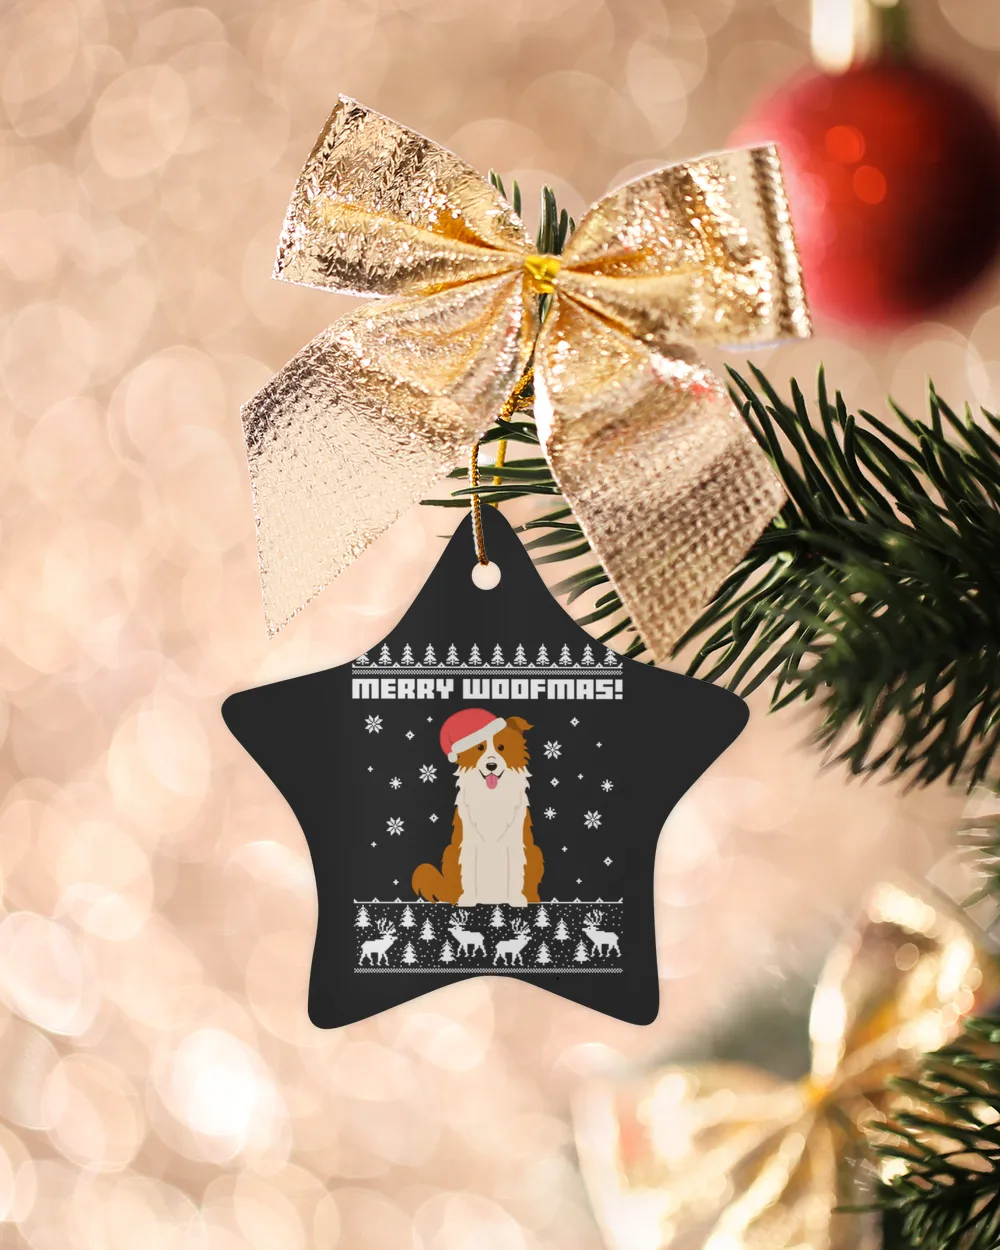 Border Collie Dog Merry Woofmas Ornament